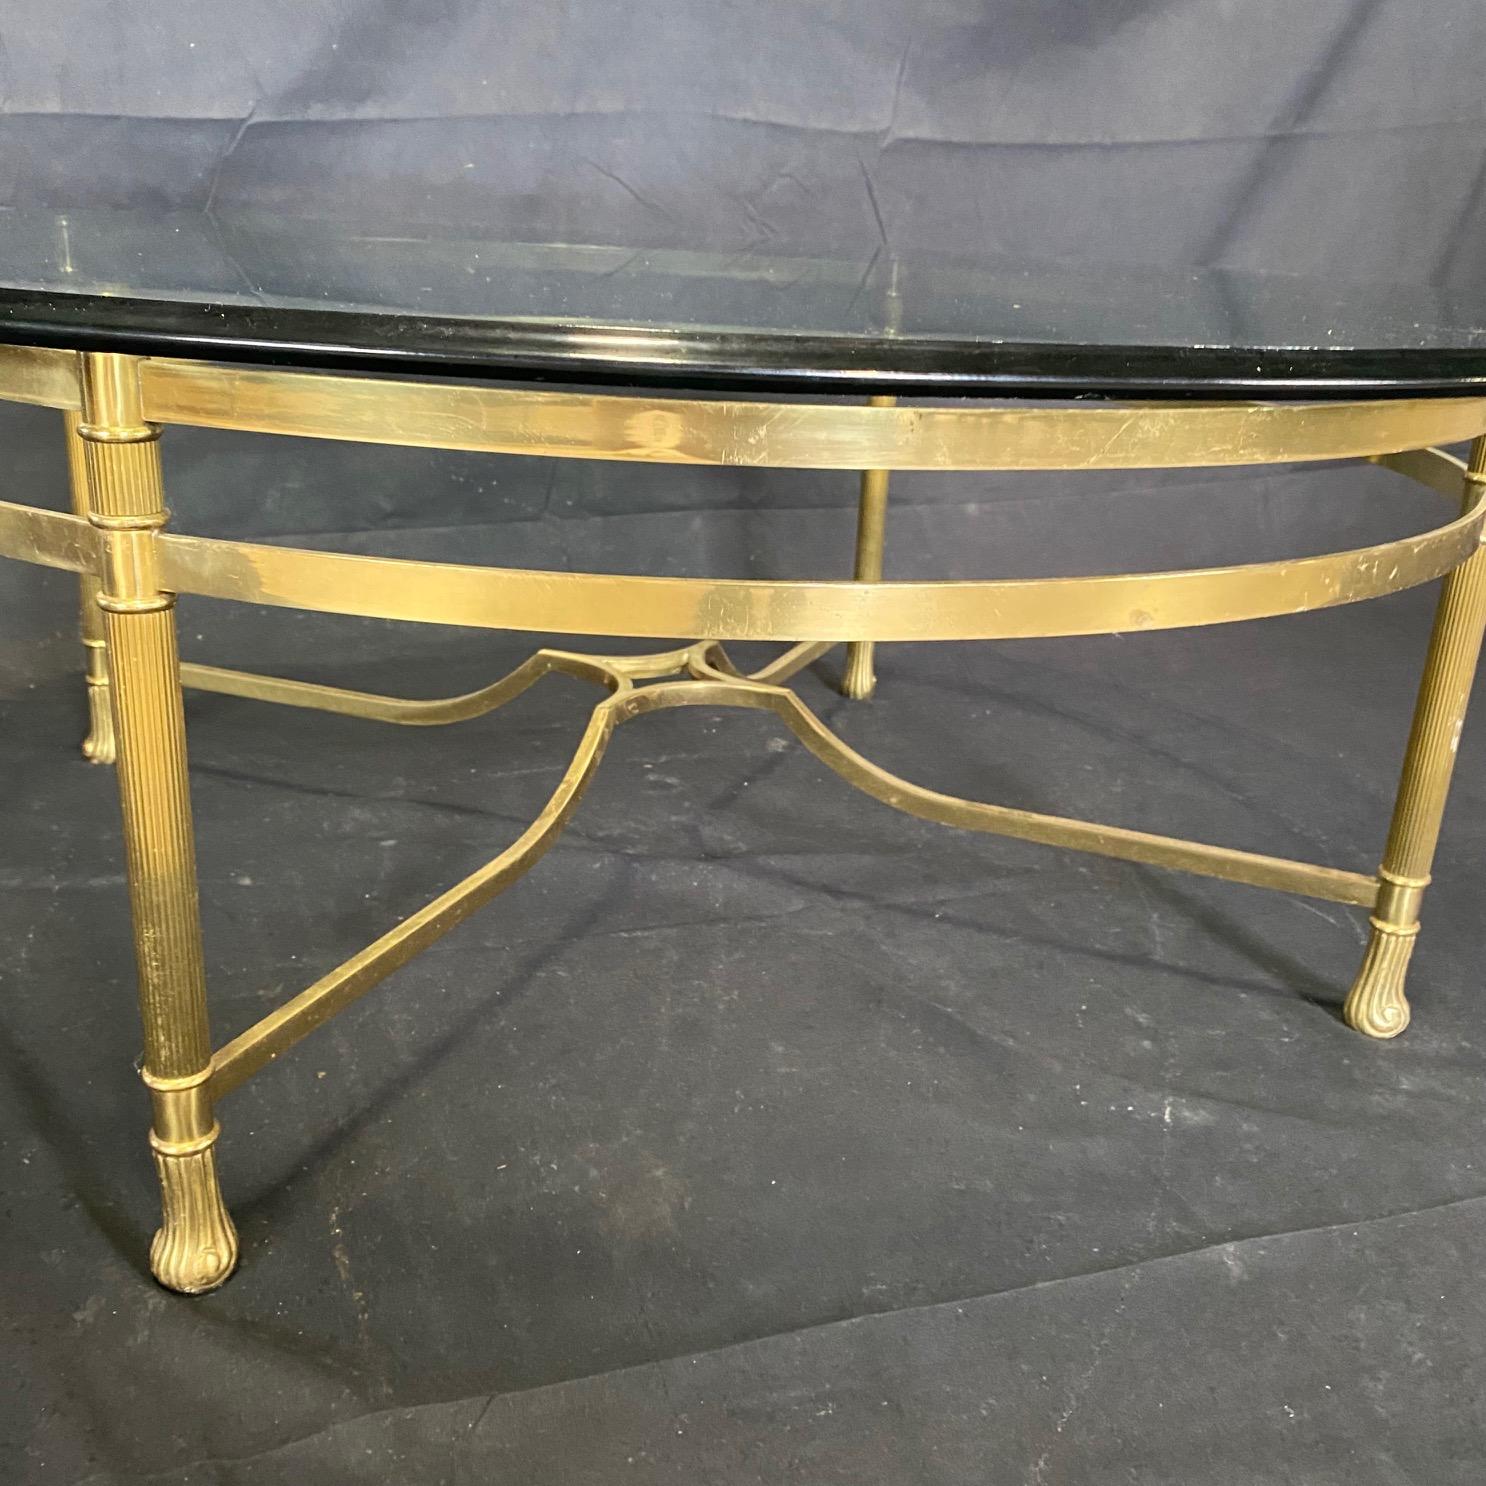 A classic brass and glass cocktail table by Labarge having solid brass curvy base with cabriole legs and pretty stretcher, topped with a thick scalloped carved edge piece of round glass.

